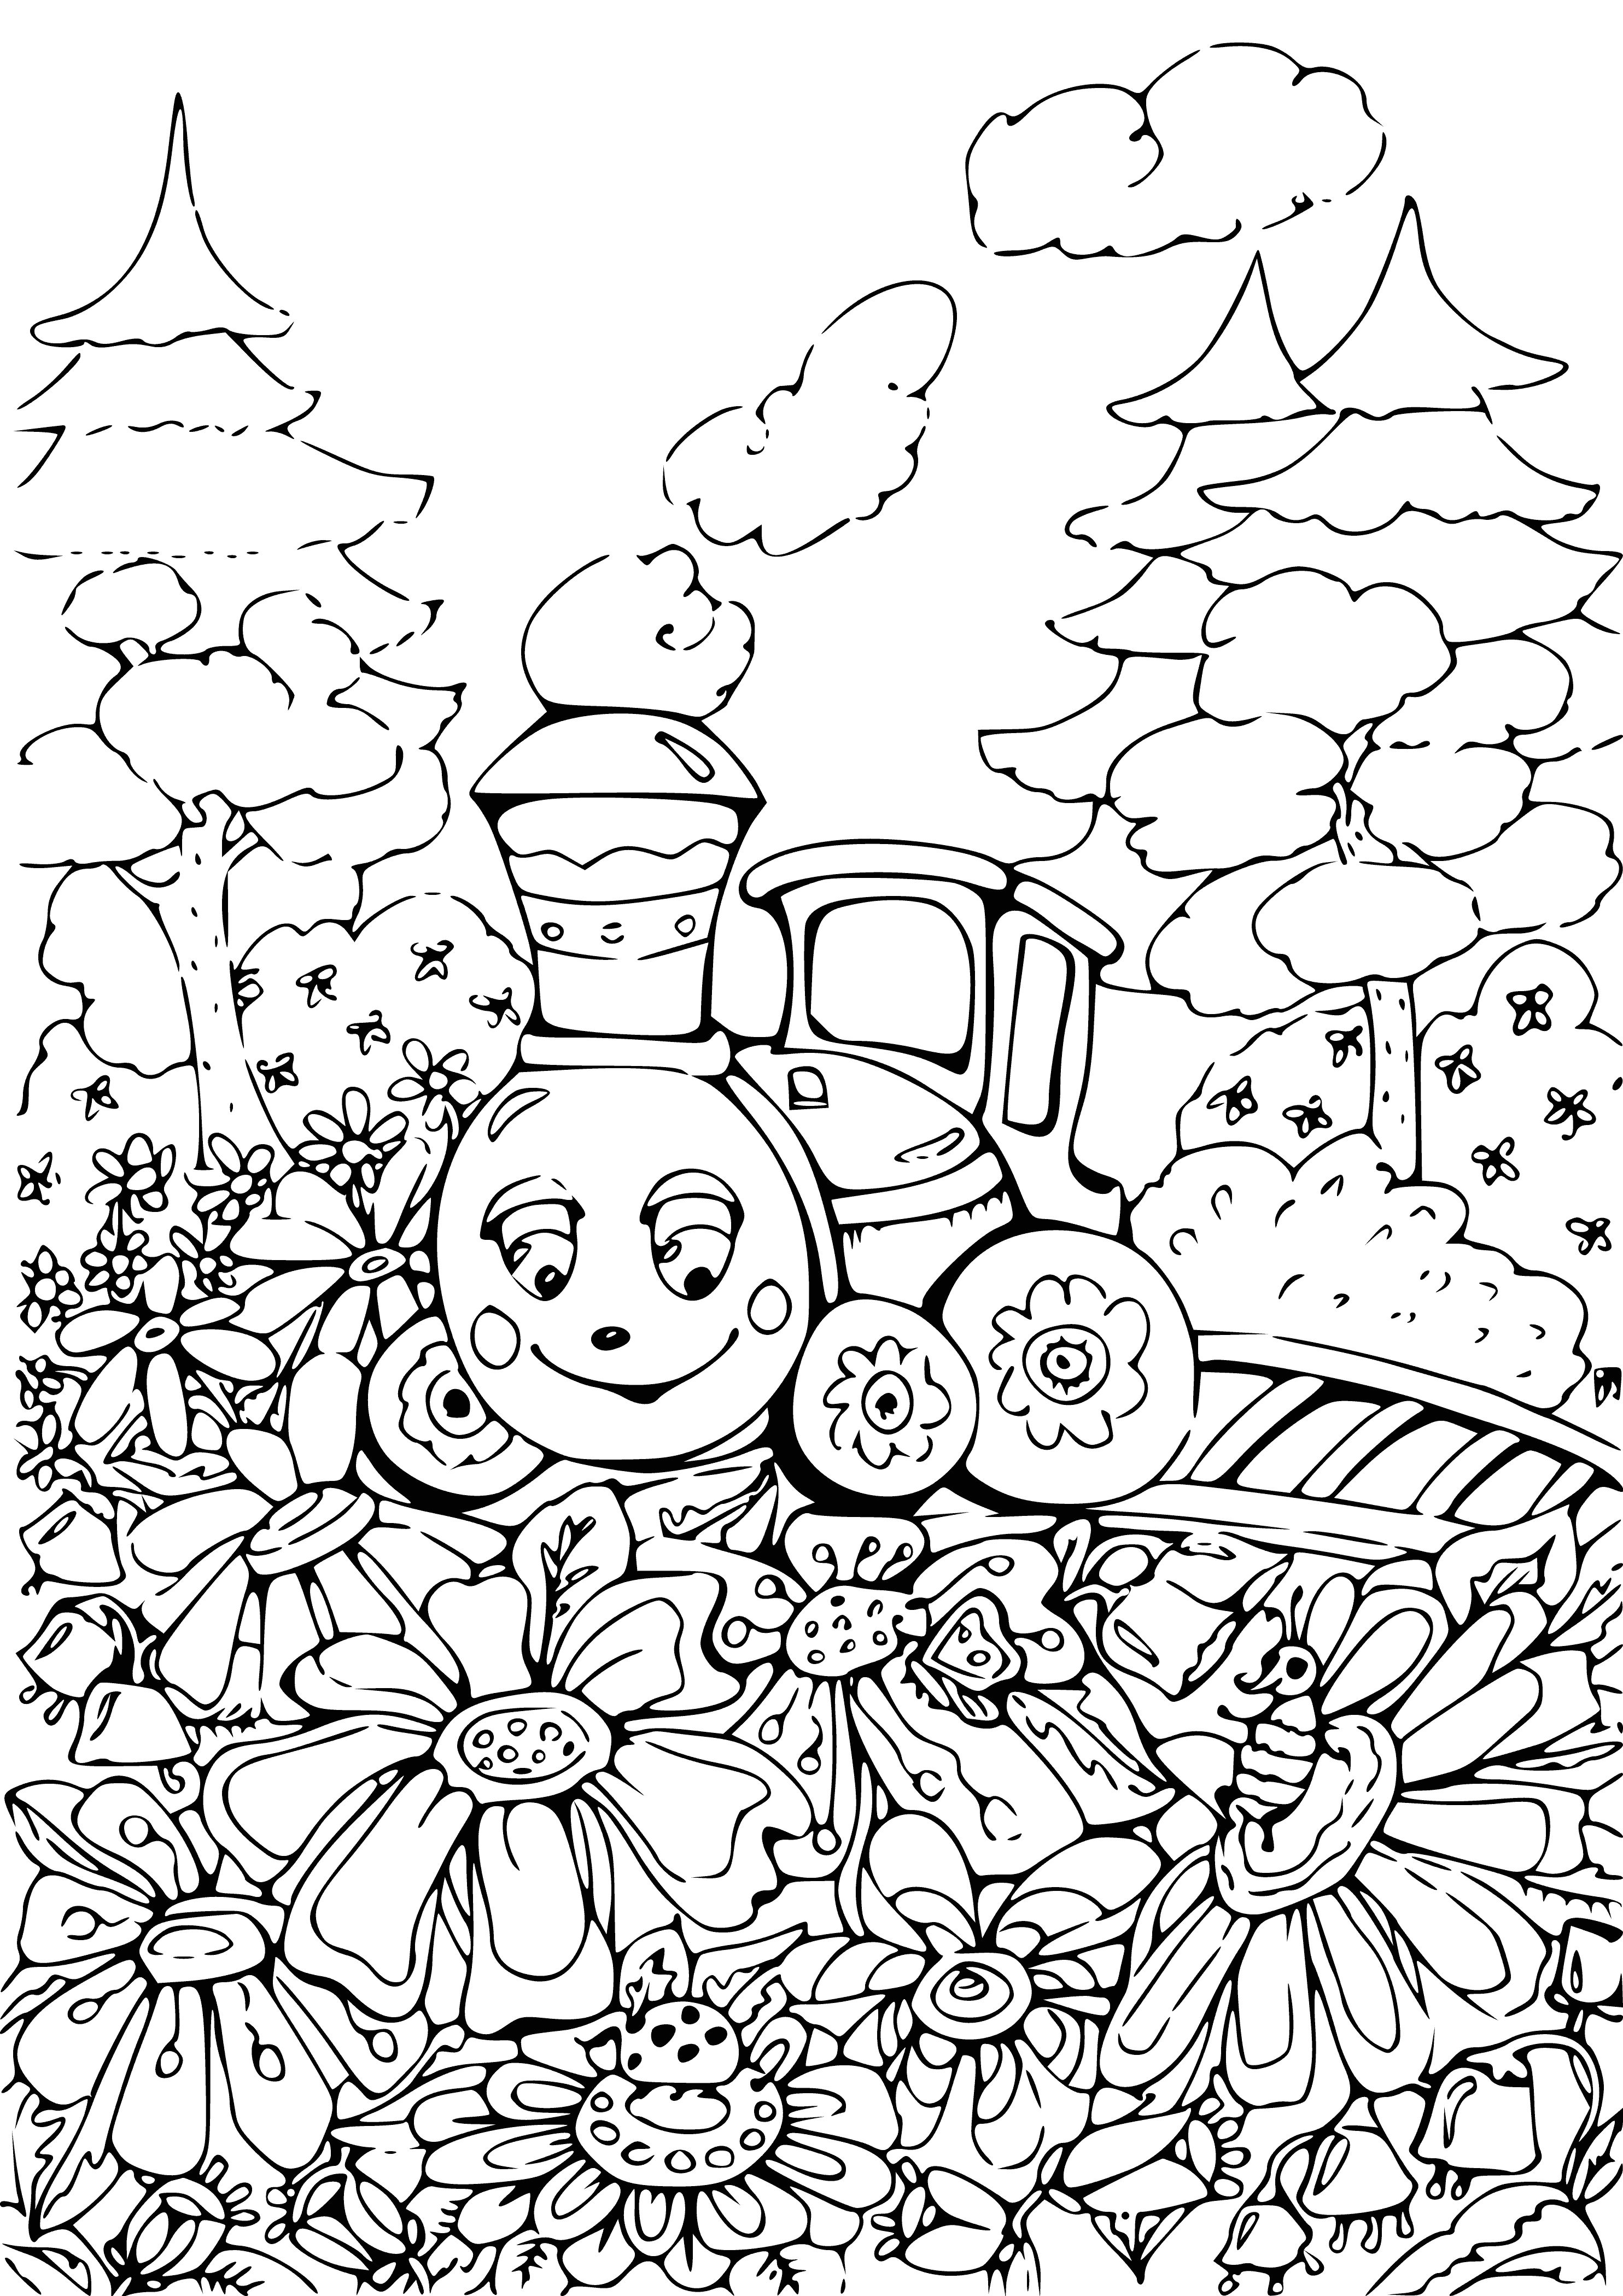 coloring page: An old-fashioned locomotive, black with 6 wheels, a smokestack & light pulling a few cars, people on the platform. #romashkovolocomotive